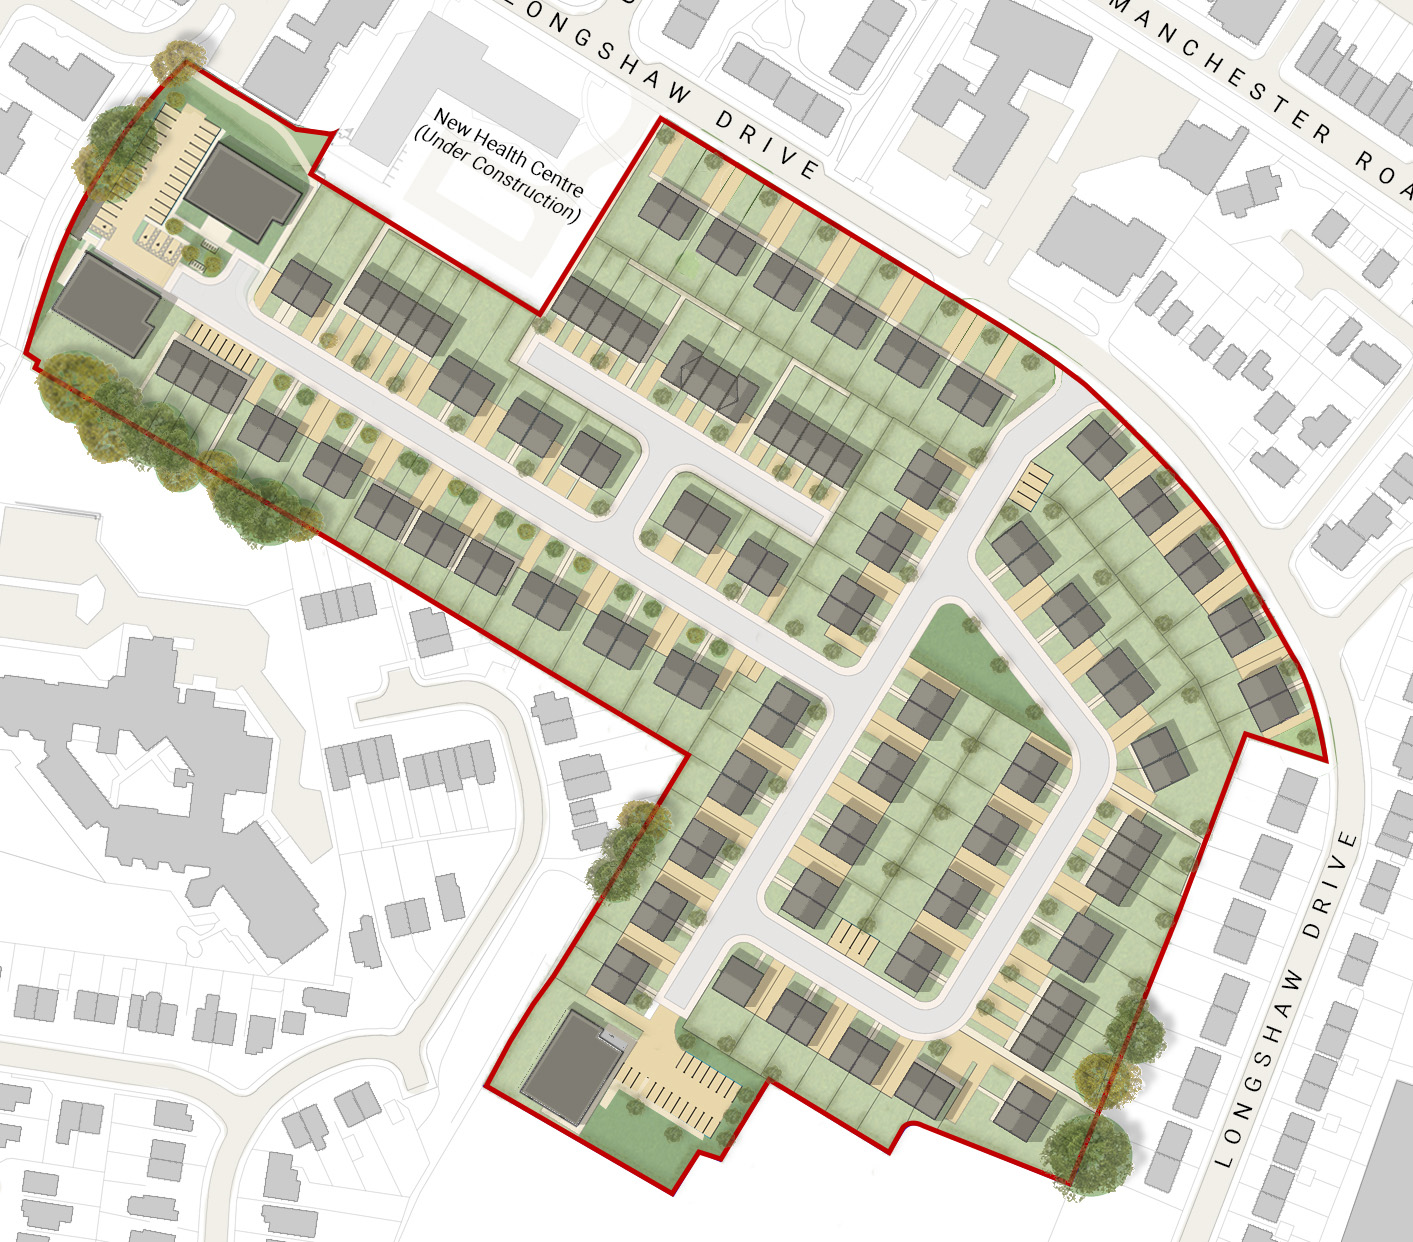 Pozzini moves forward with North West’s large-scale low energy housing development